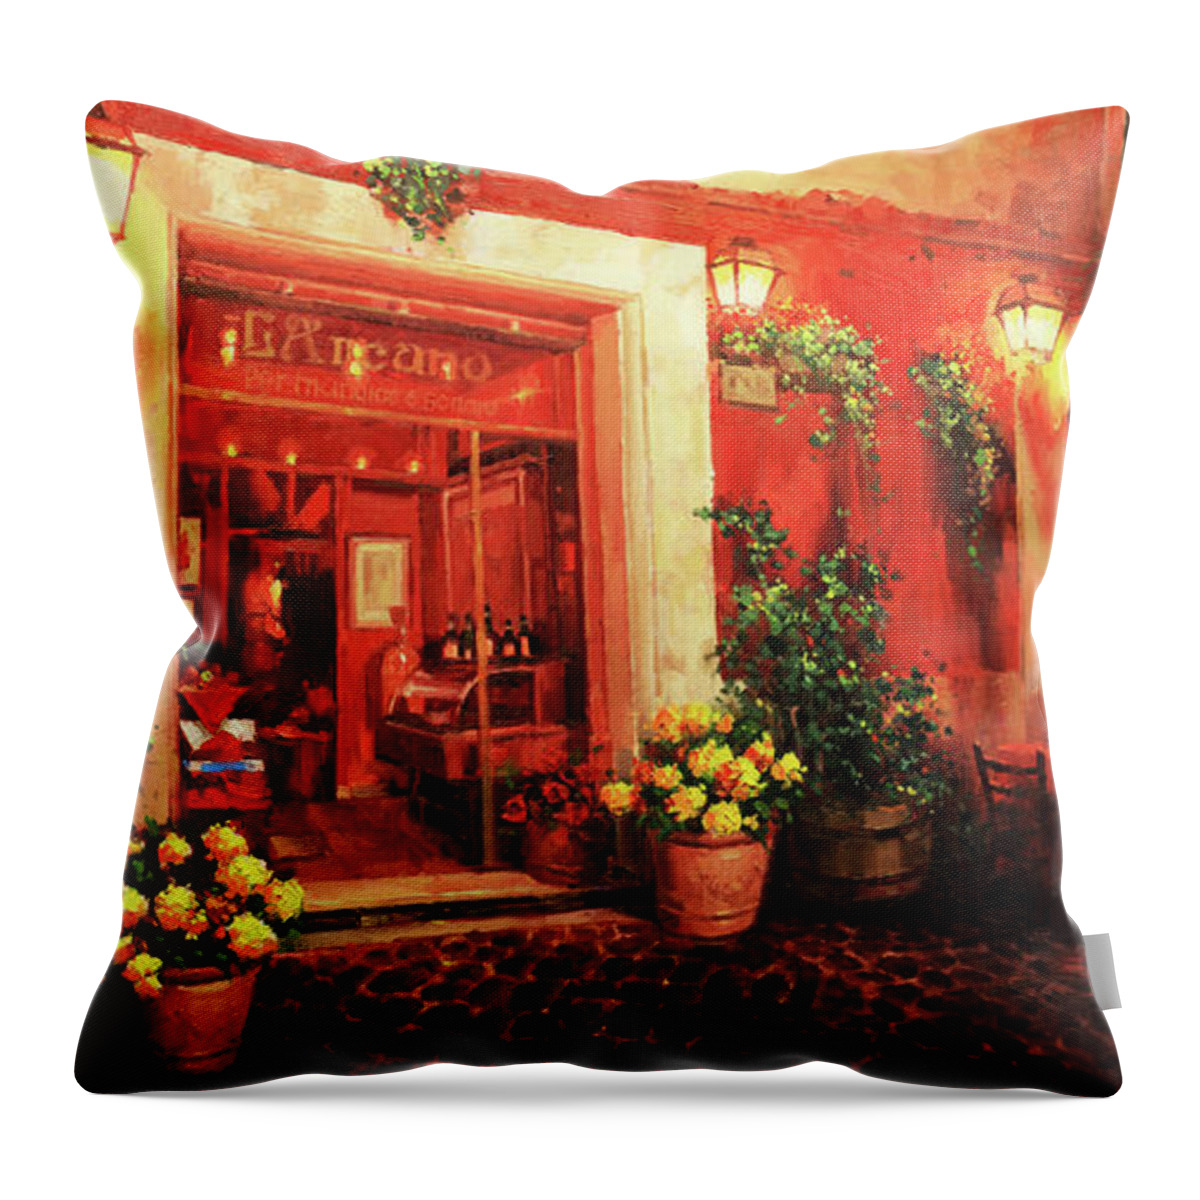 Romantic Evening Seating In Italian Street Cafe Scene Romantic Dinner Night Italian Restaurant With Outdoor Garden Night Cafe Small Alley Italy Italian Cafe Terrace Nightafter Rain Shop Throw Pillow featuring the painting Italian cafe terrace at night by Gary Kim